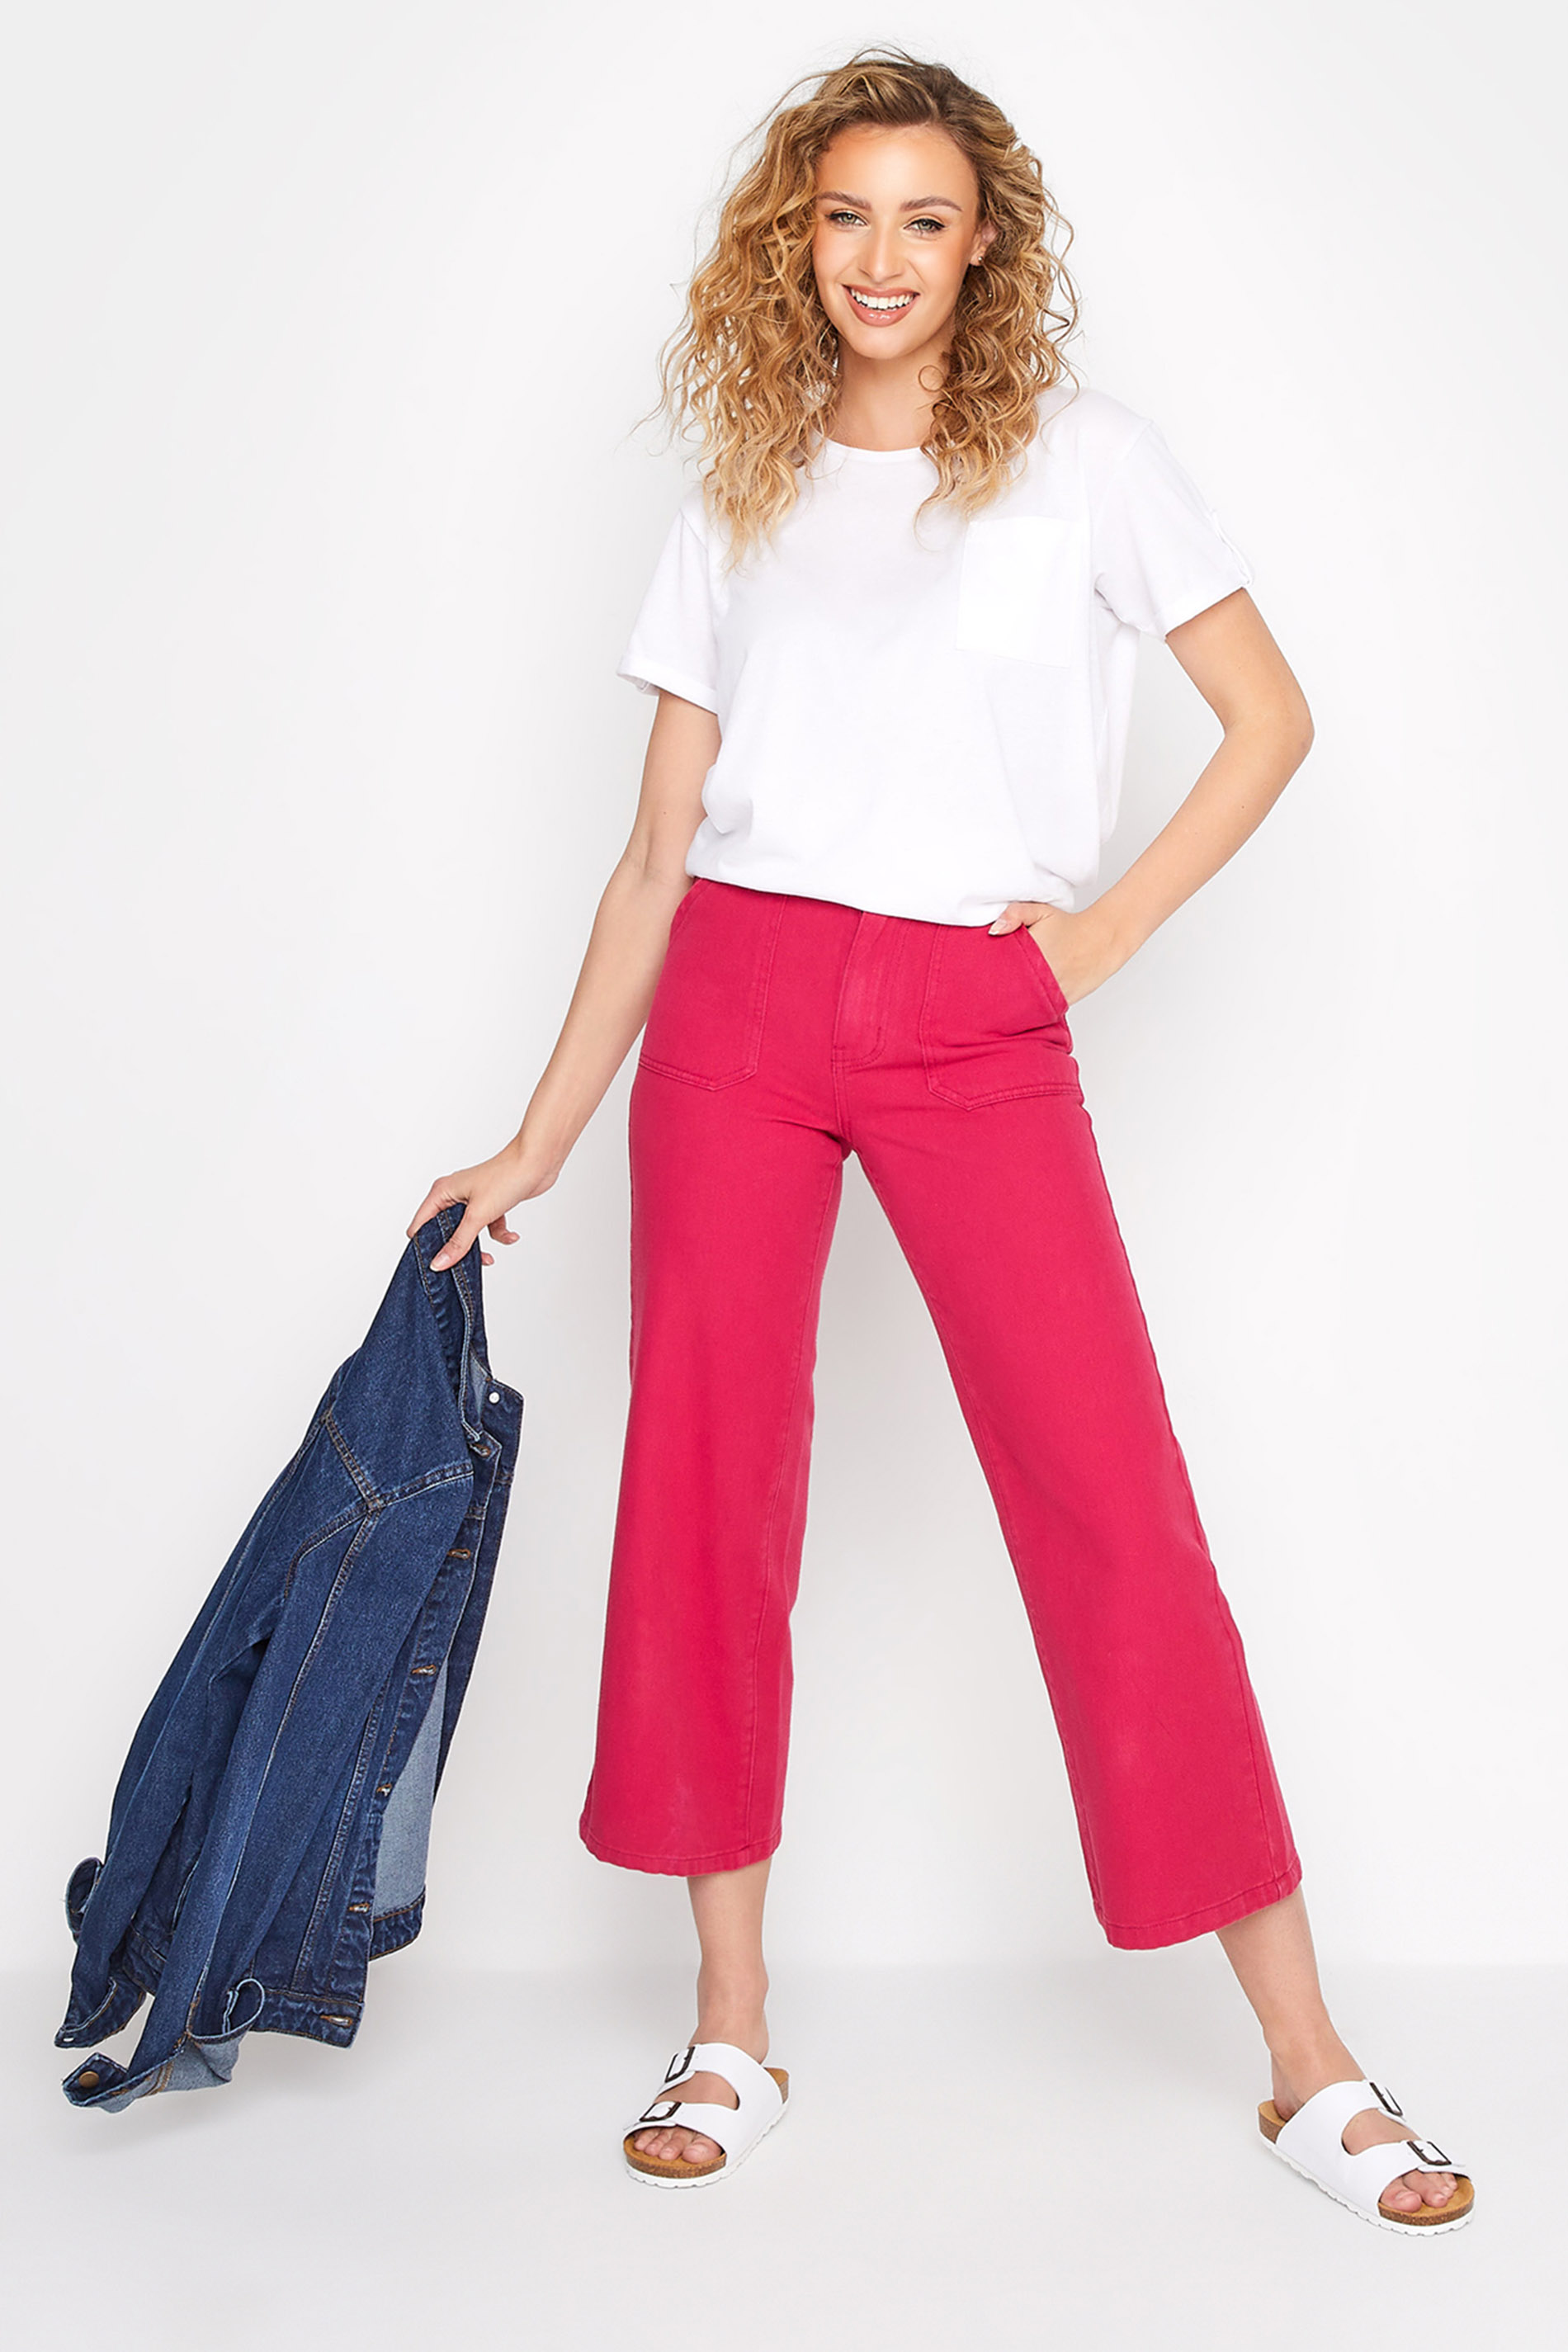 LTS Tall Women's Bright Pink Cotton Twill Wide Leg Cropped Trousers | Long Tall Sally 2